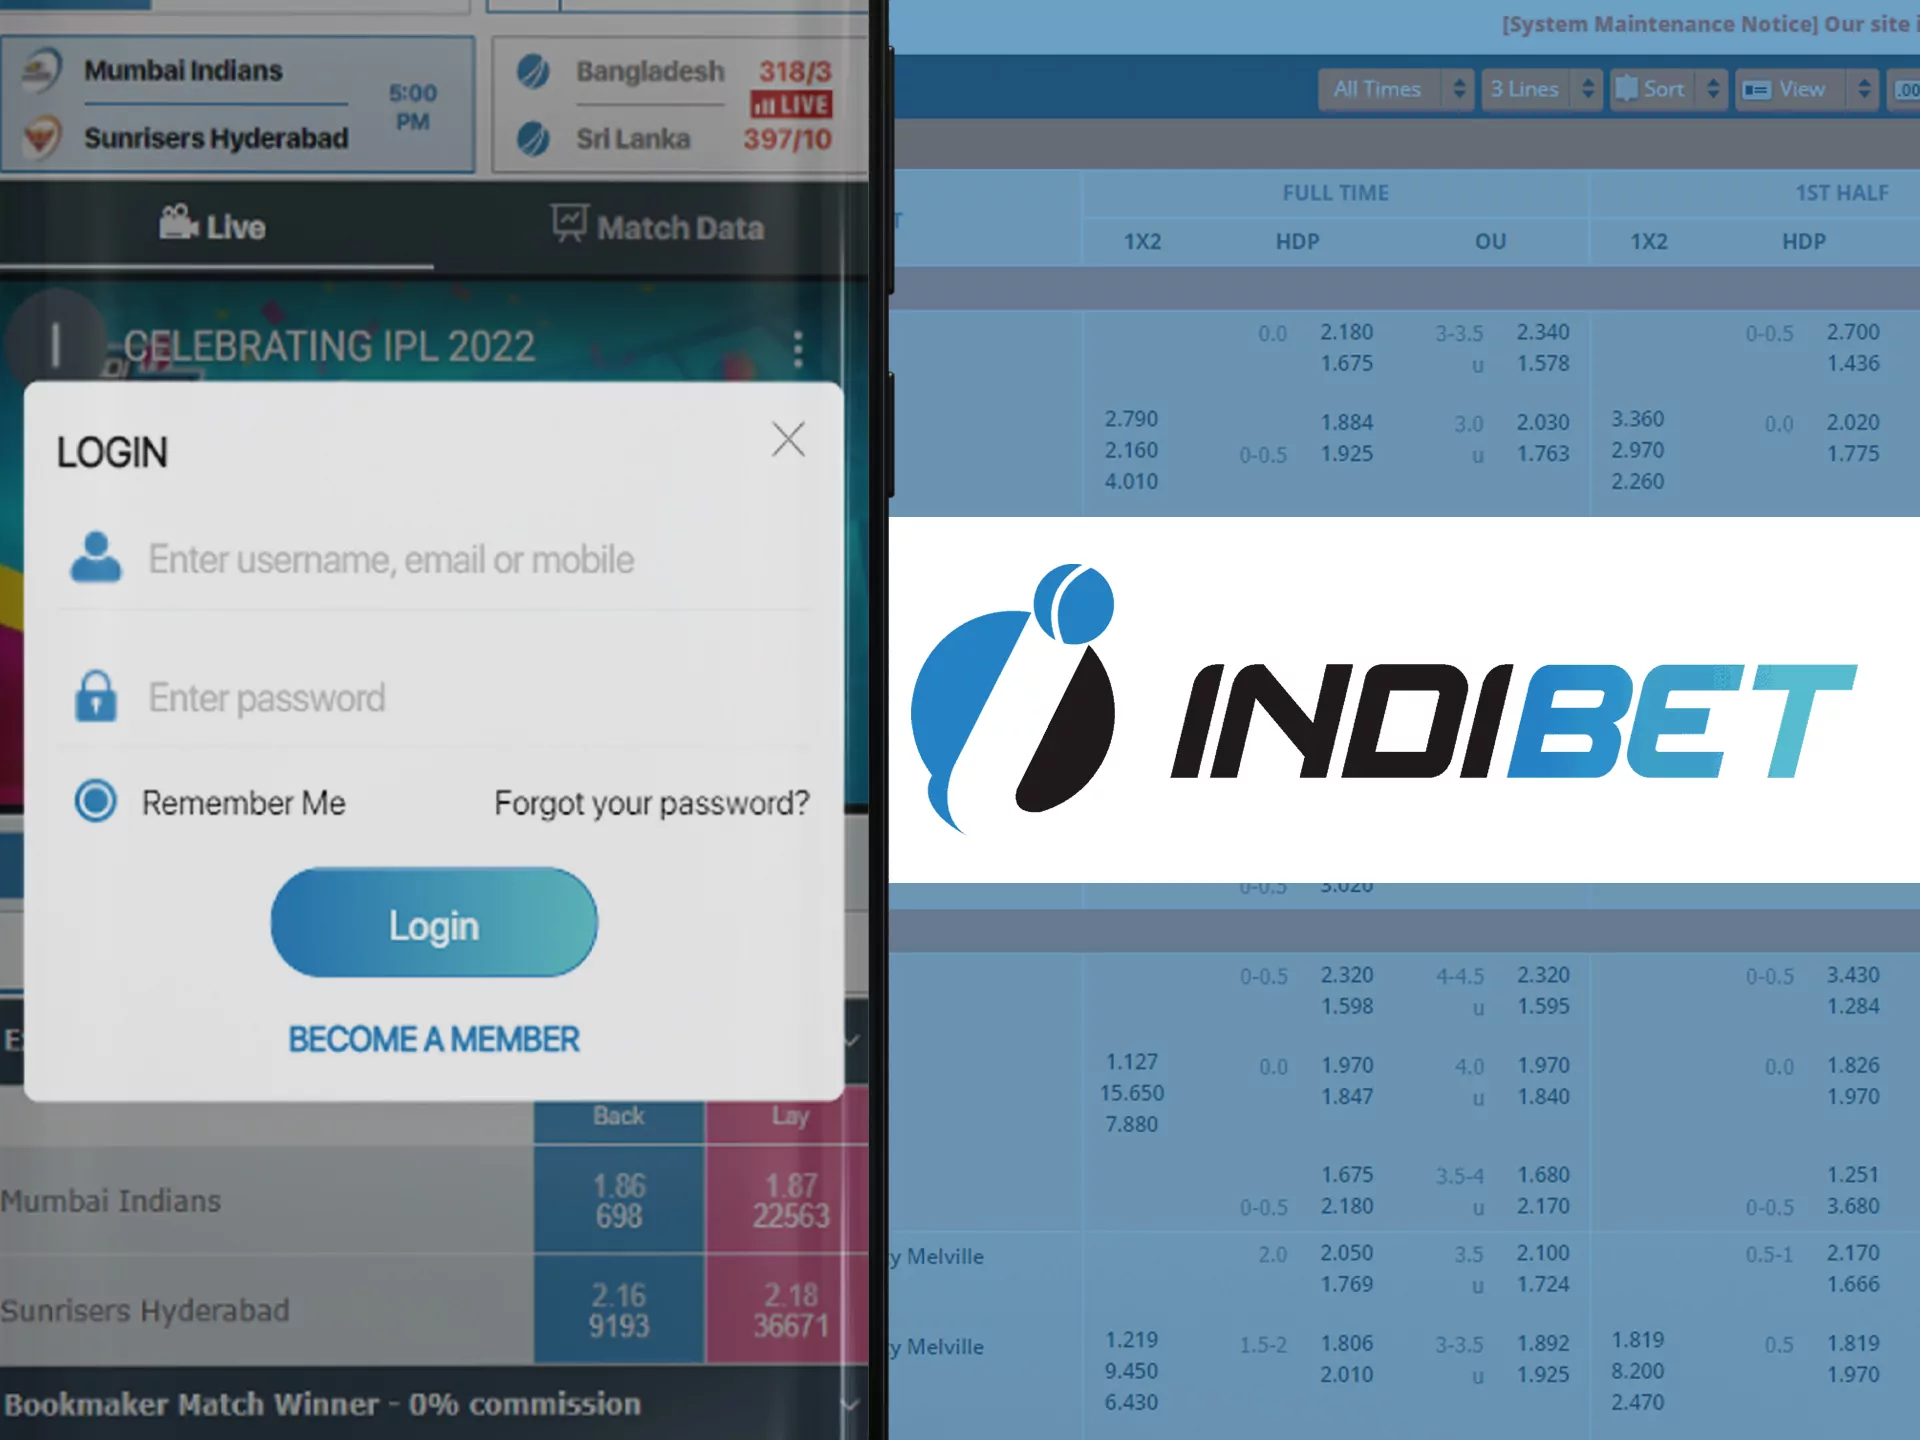 Log in to Indibet with your username and password.